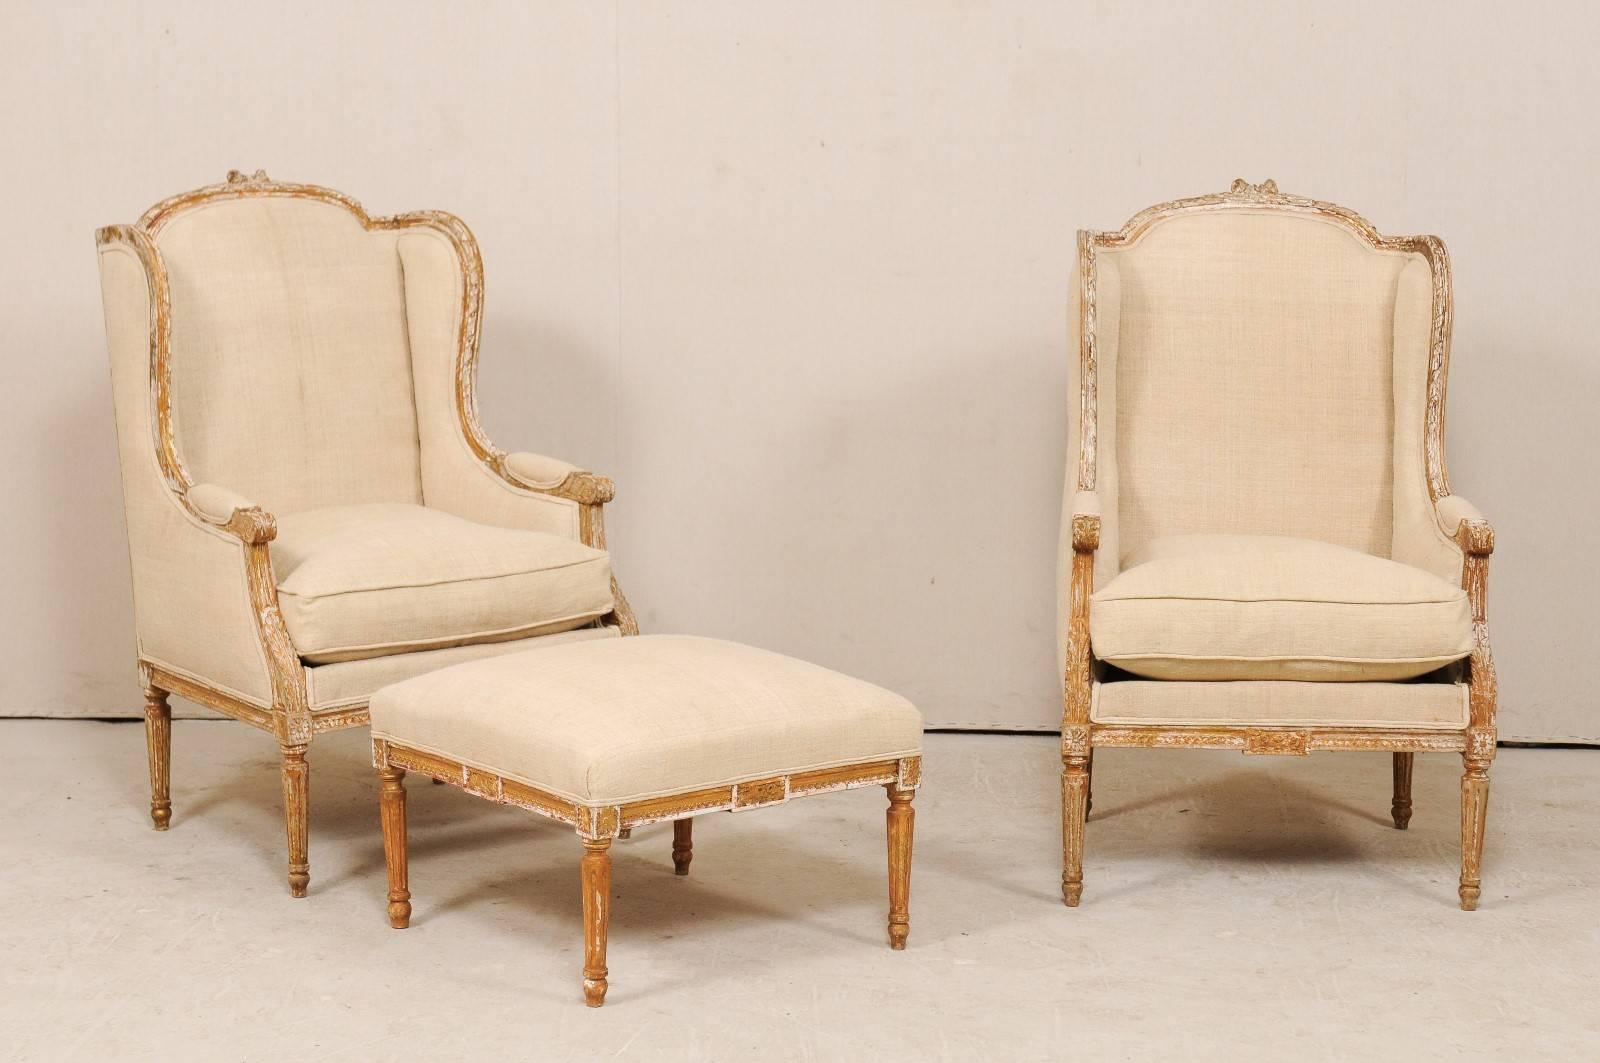 A pair of French Louis XVI style wing bergeres with single ottoman from the early 20th century. This antique French seating arrangement features two arched winged arm chairs with arched crest rails with a bow-knot at their centres, beautiful